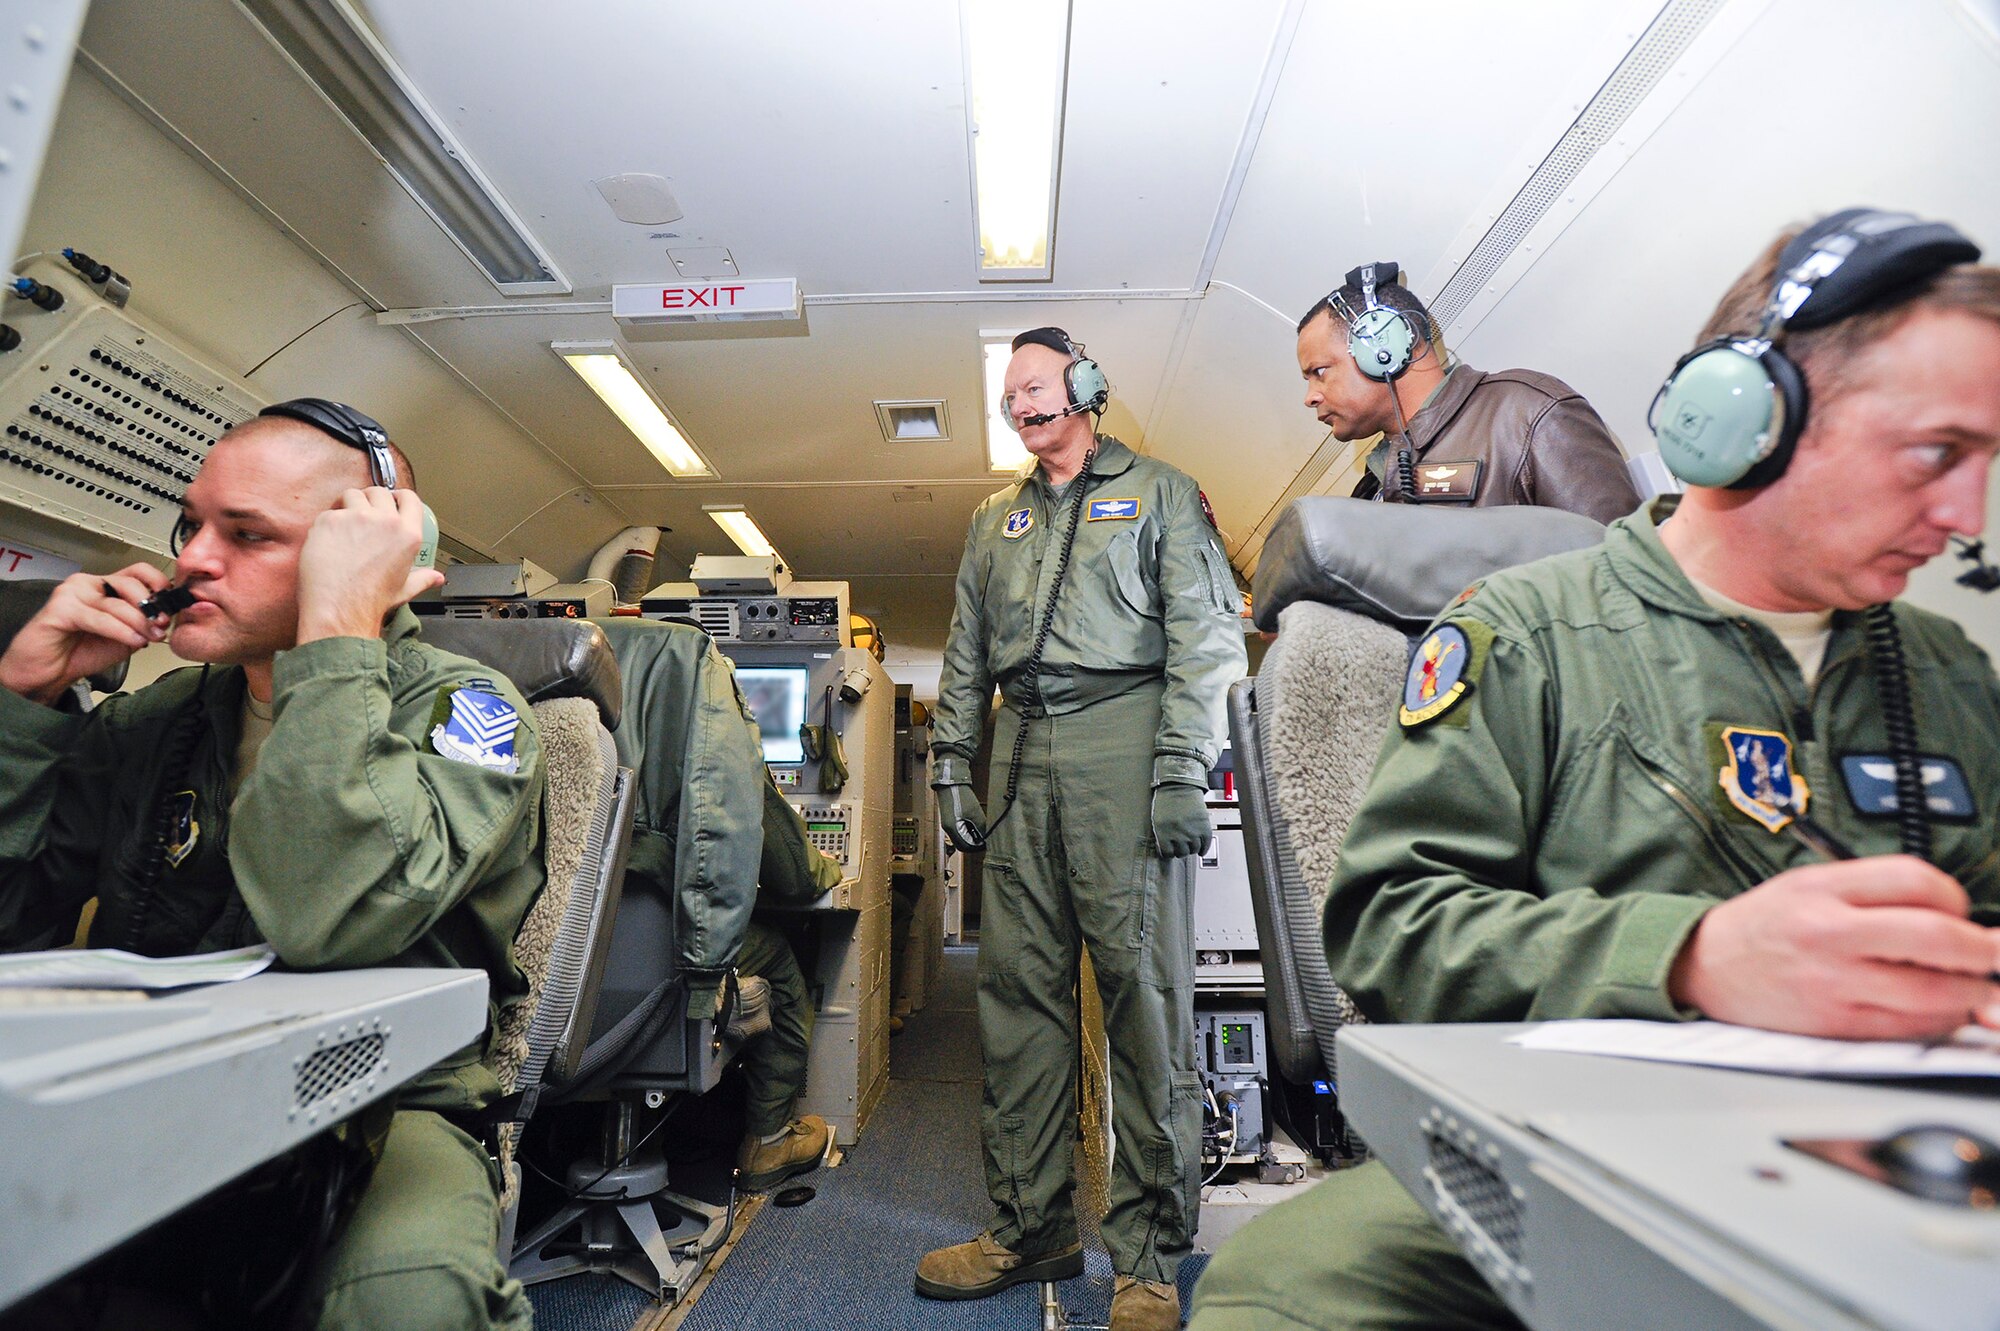 Lt. Gen. Harry Wyatt III, left,  Air National Guard (ANG) director and Col. David Gross, ANG Executive Officer, observe E-8 Joint STARS (JSTARS) crewmembers working at their battle stations during an orientation flight, Robins Air Force Base, Ga., Dec. 05, 2011.  Wyatt went on the flight to learn more about the capabilities of the JSTARS weapon system.  (National Guard photo by Master Sgt. Roger Parsons/Released)